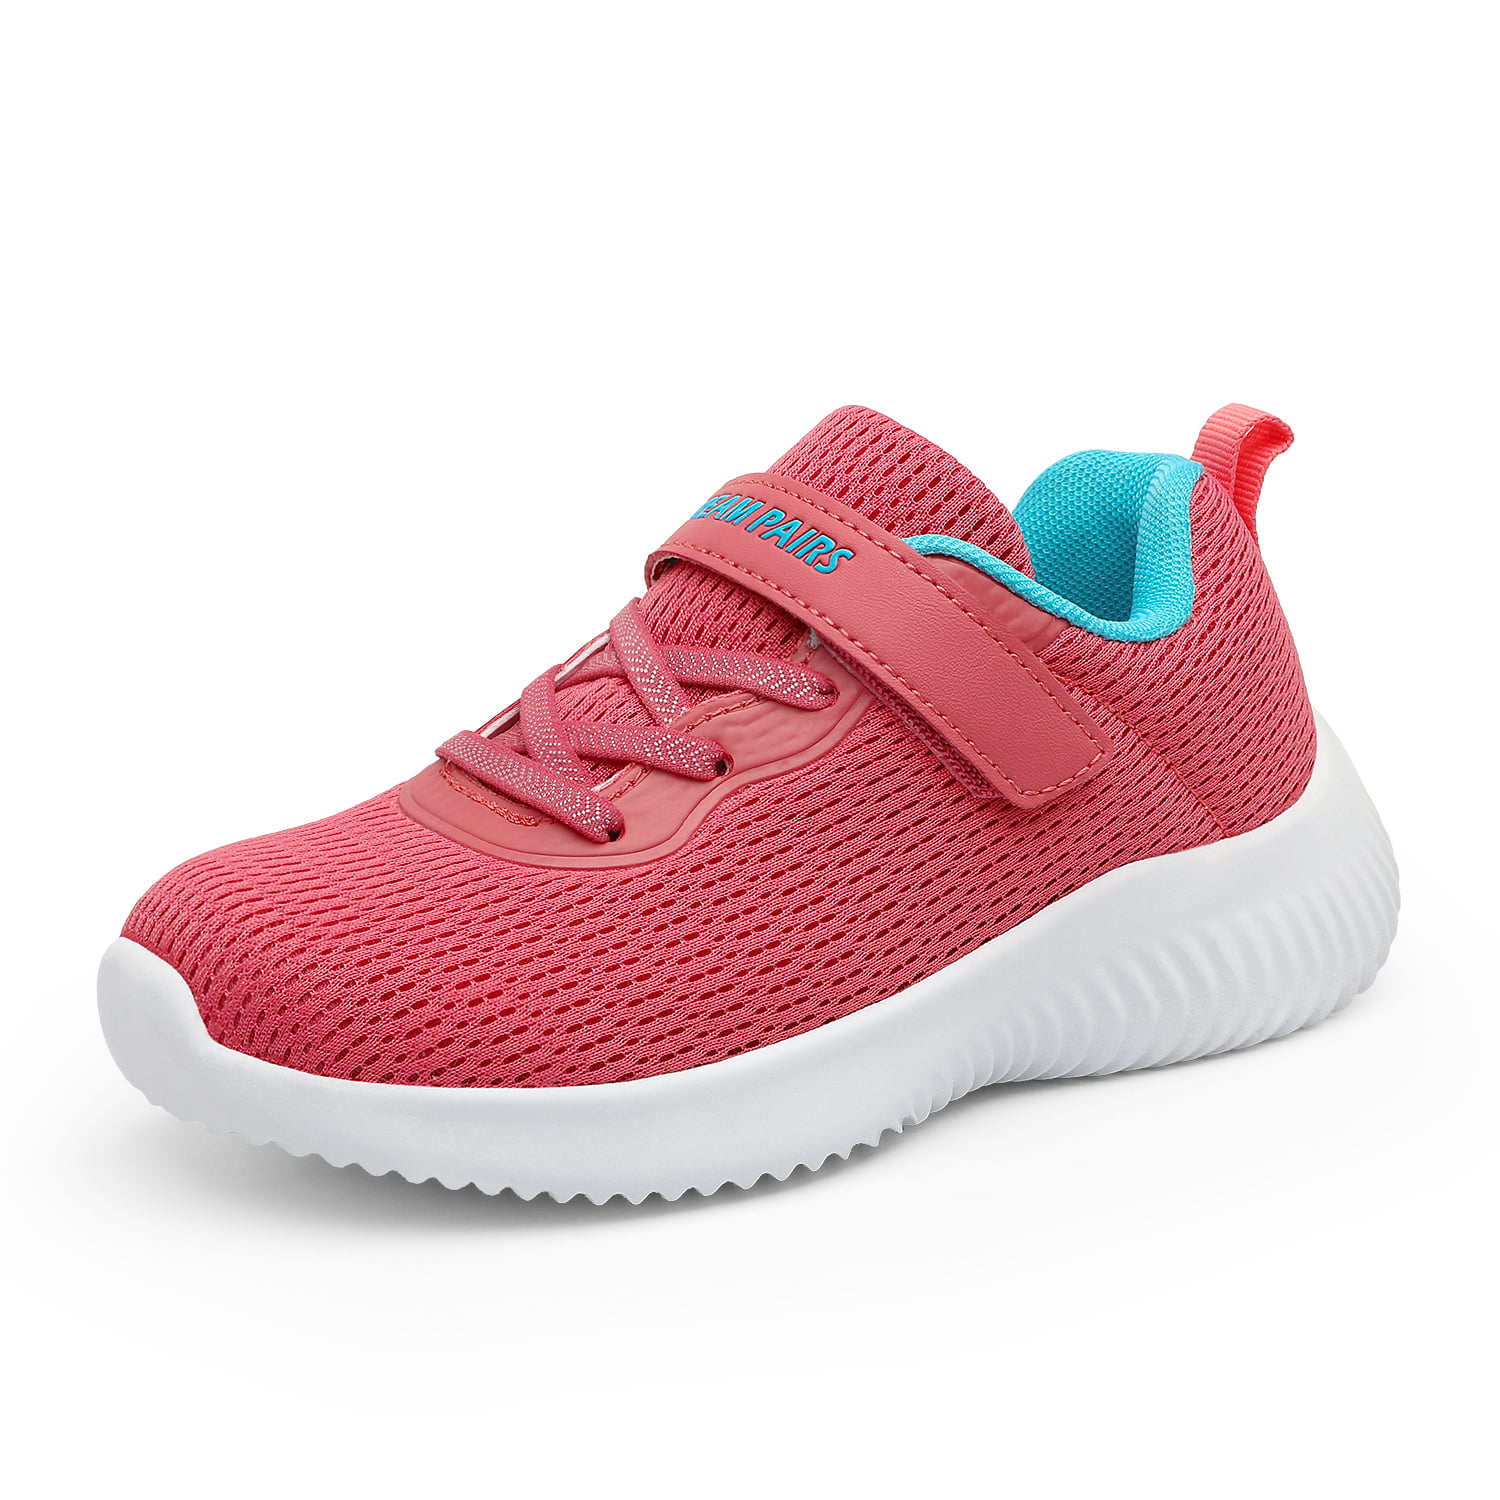 DREAM PAIRS Boys Girls Breathable Sneakers Running Shoes